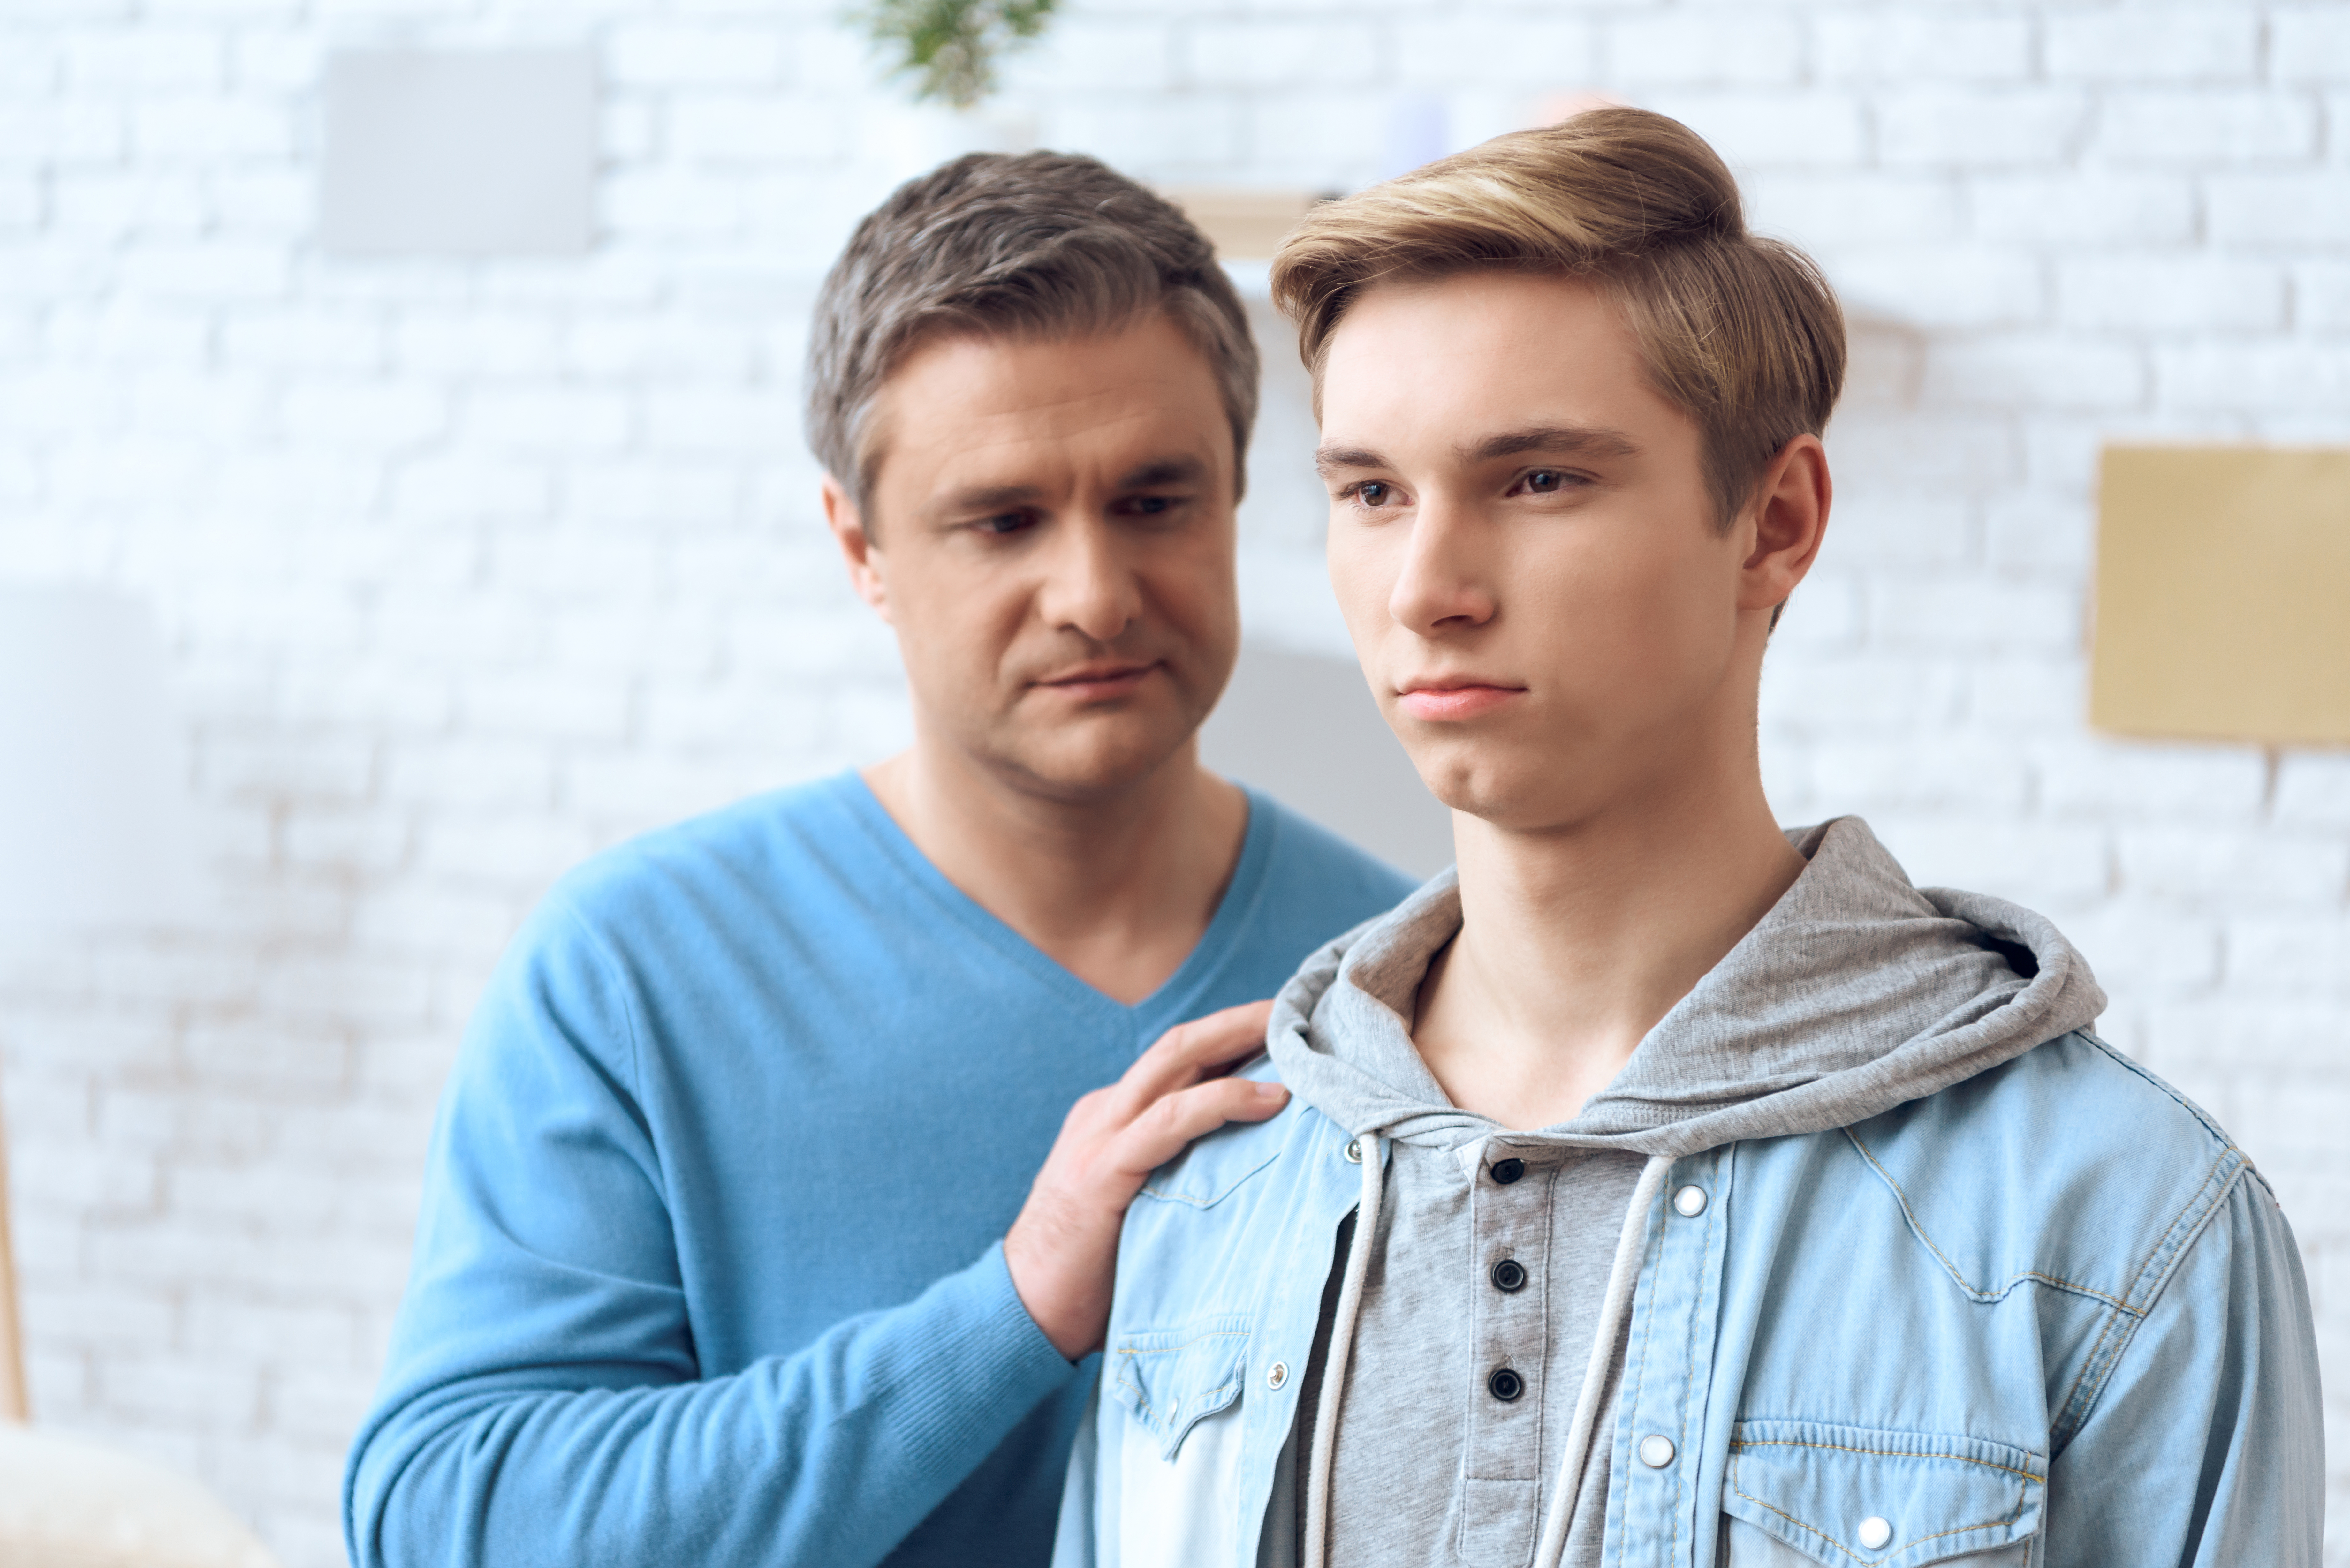 Boy staring into the distance as his father touches his shoulder. | Source: Shutterstock